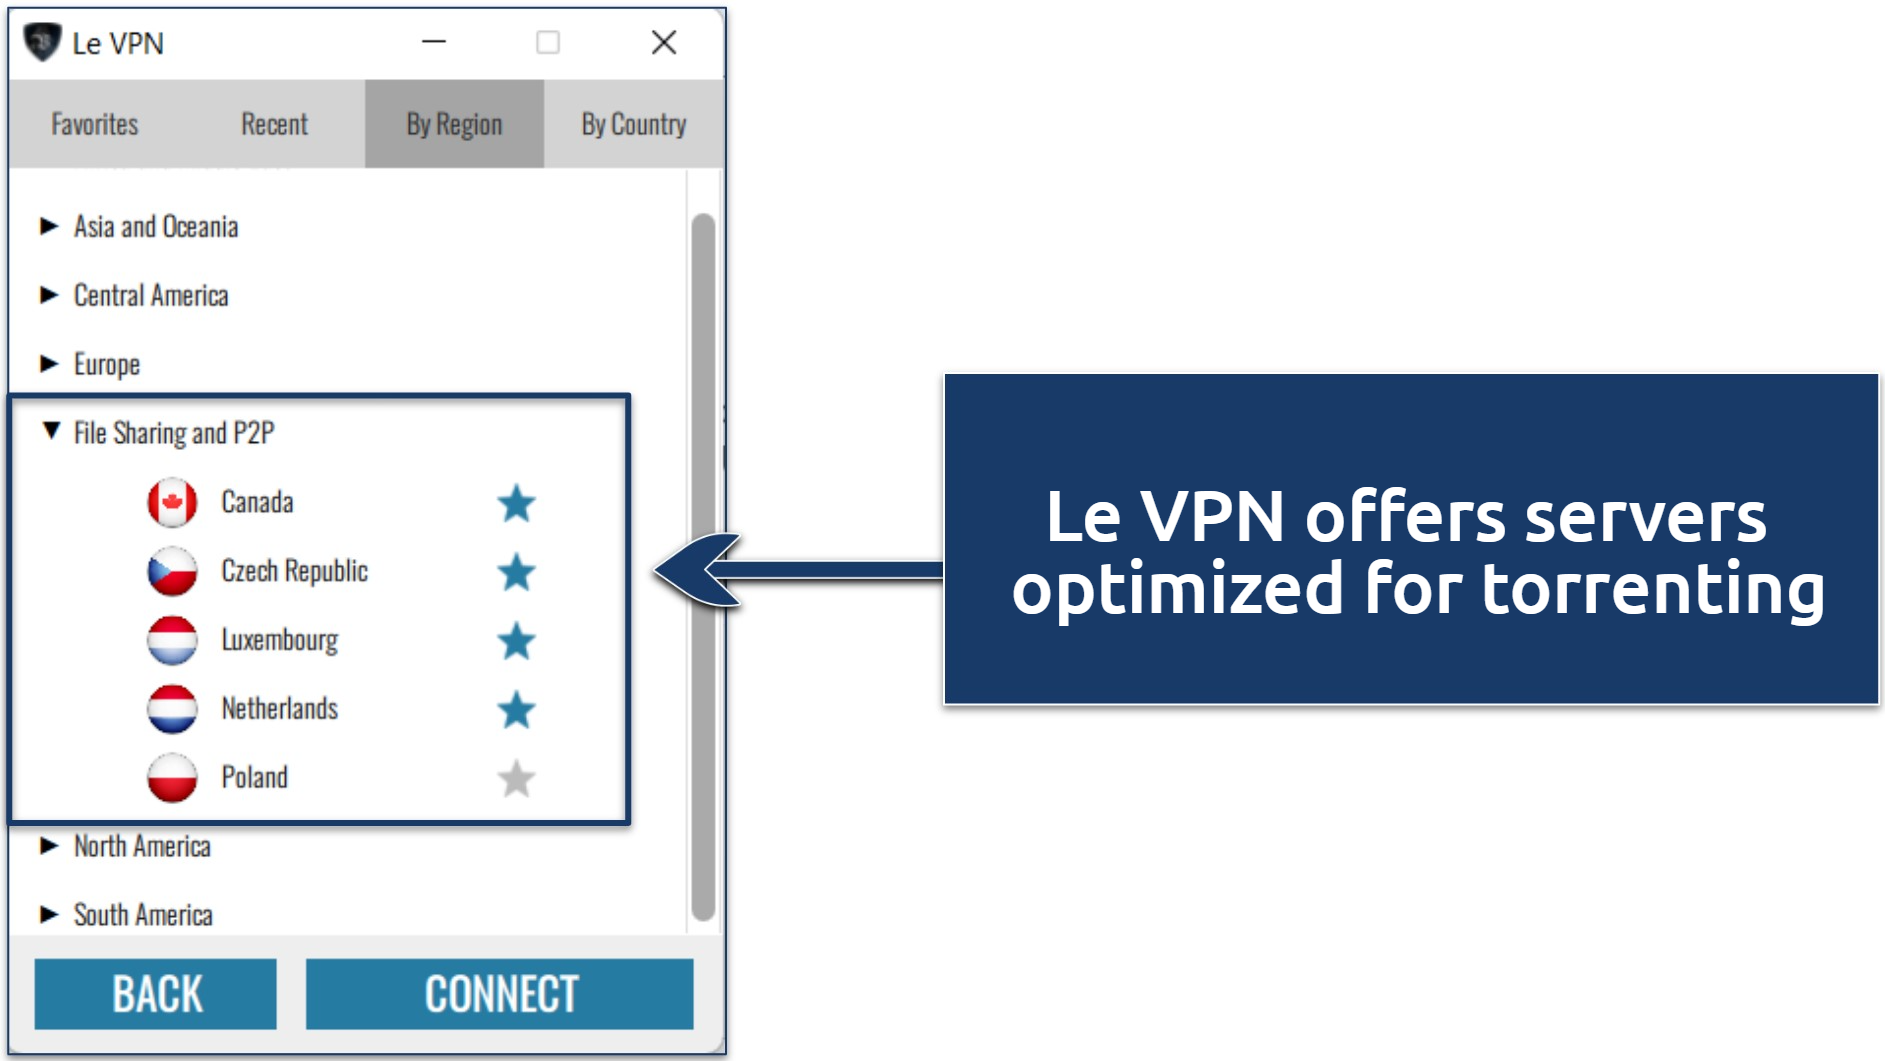 A screenshot showing Le VPN offers specialty serves for torrenting